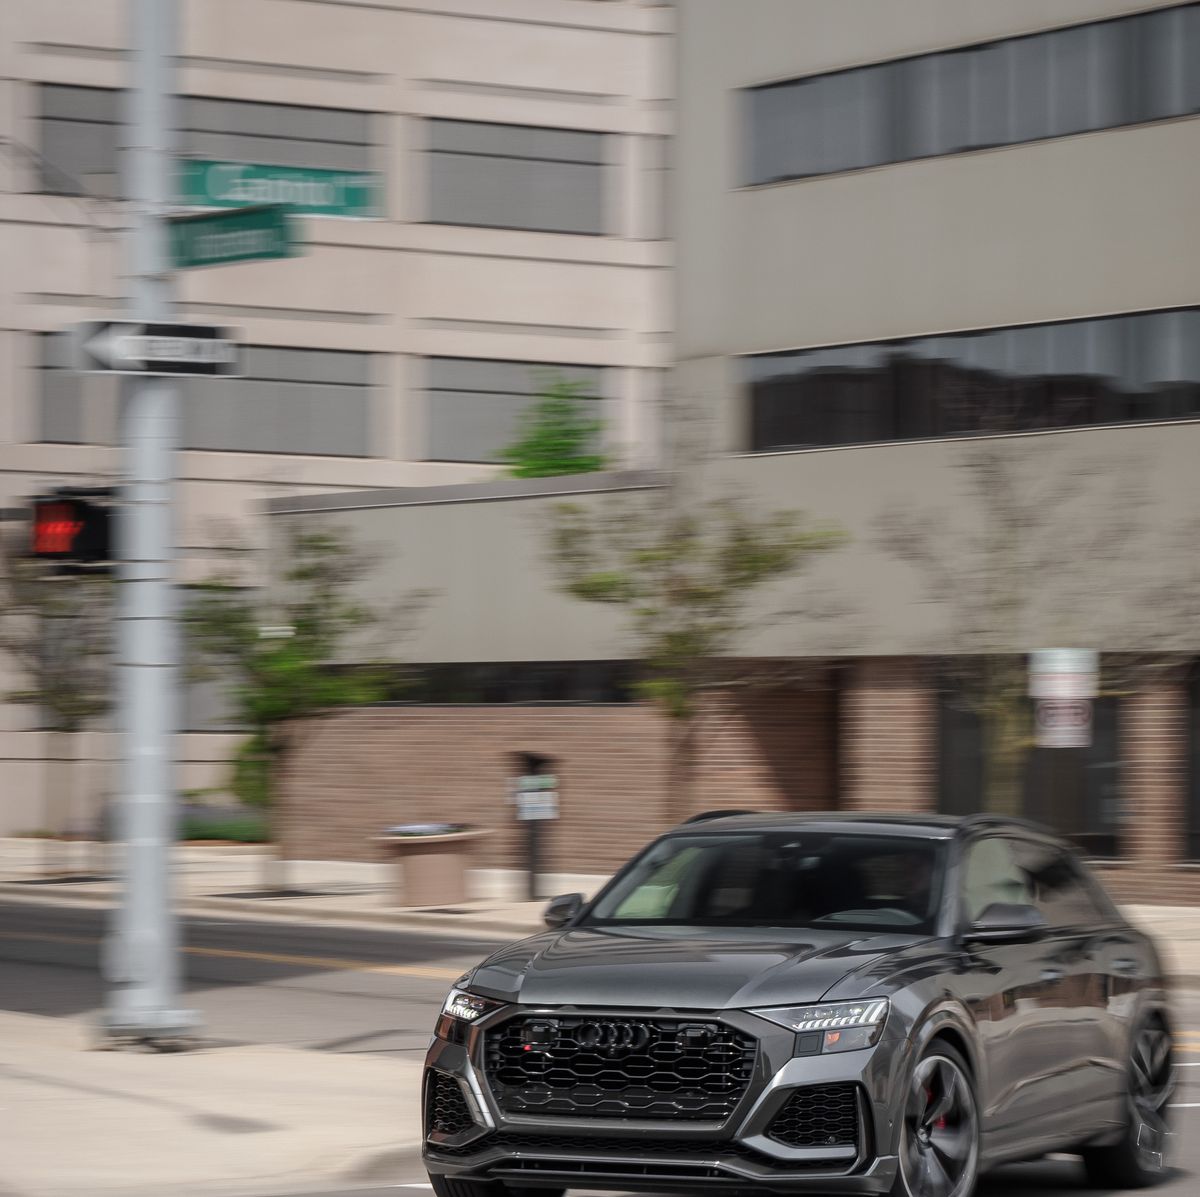 Tested: 2020 Audi RS Q8 Delivers Wicked Performance, No Regrets